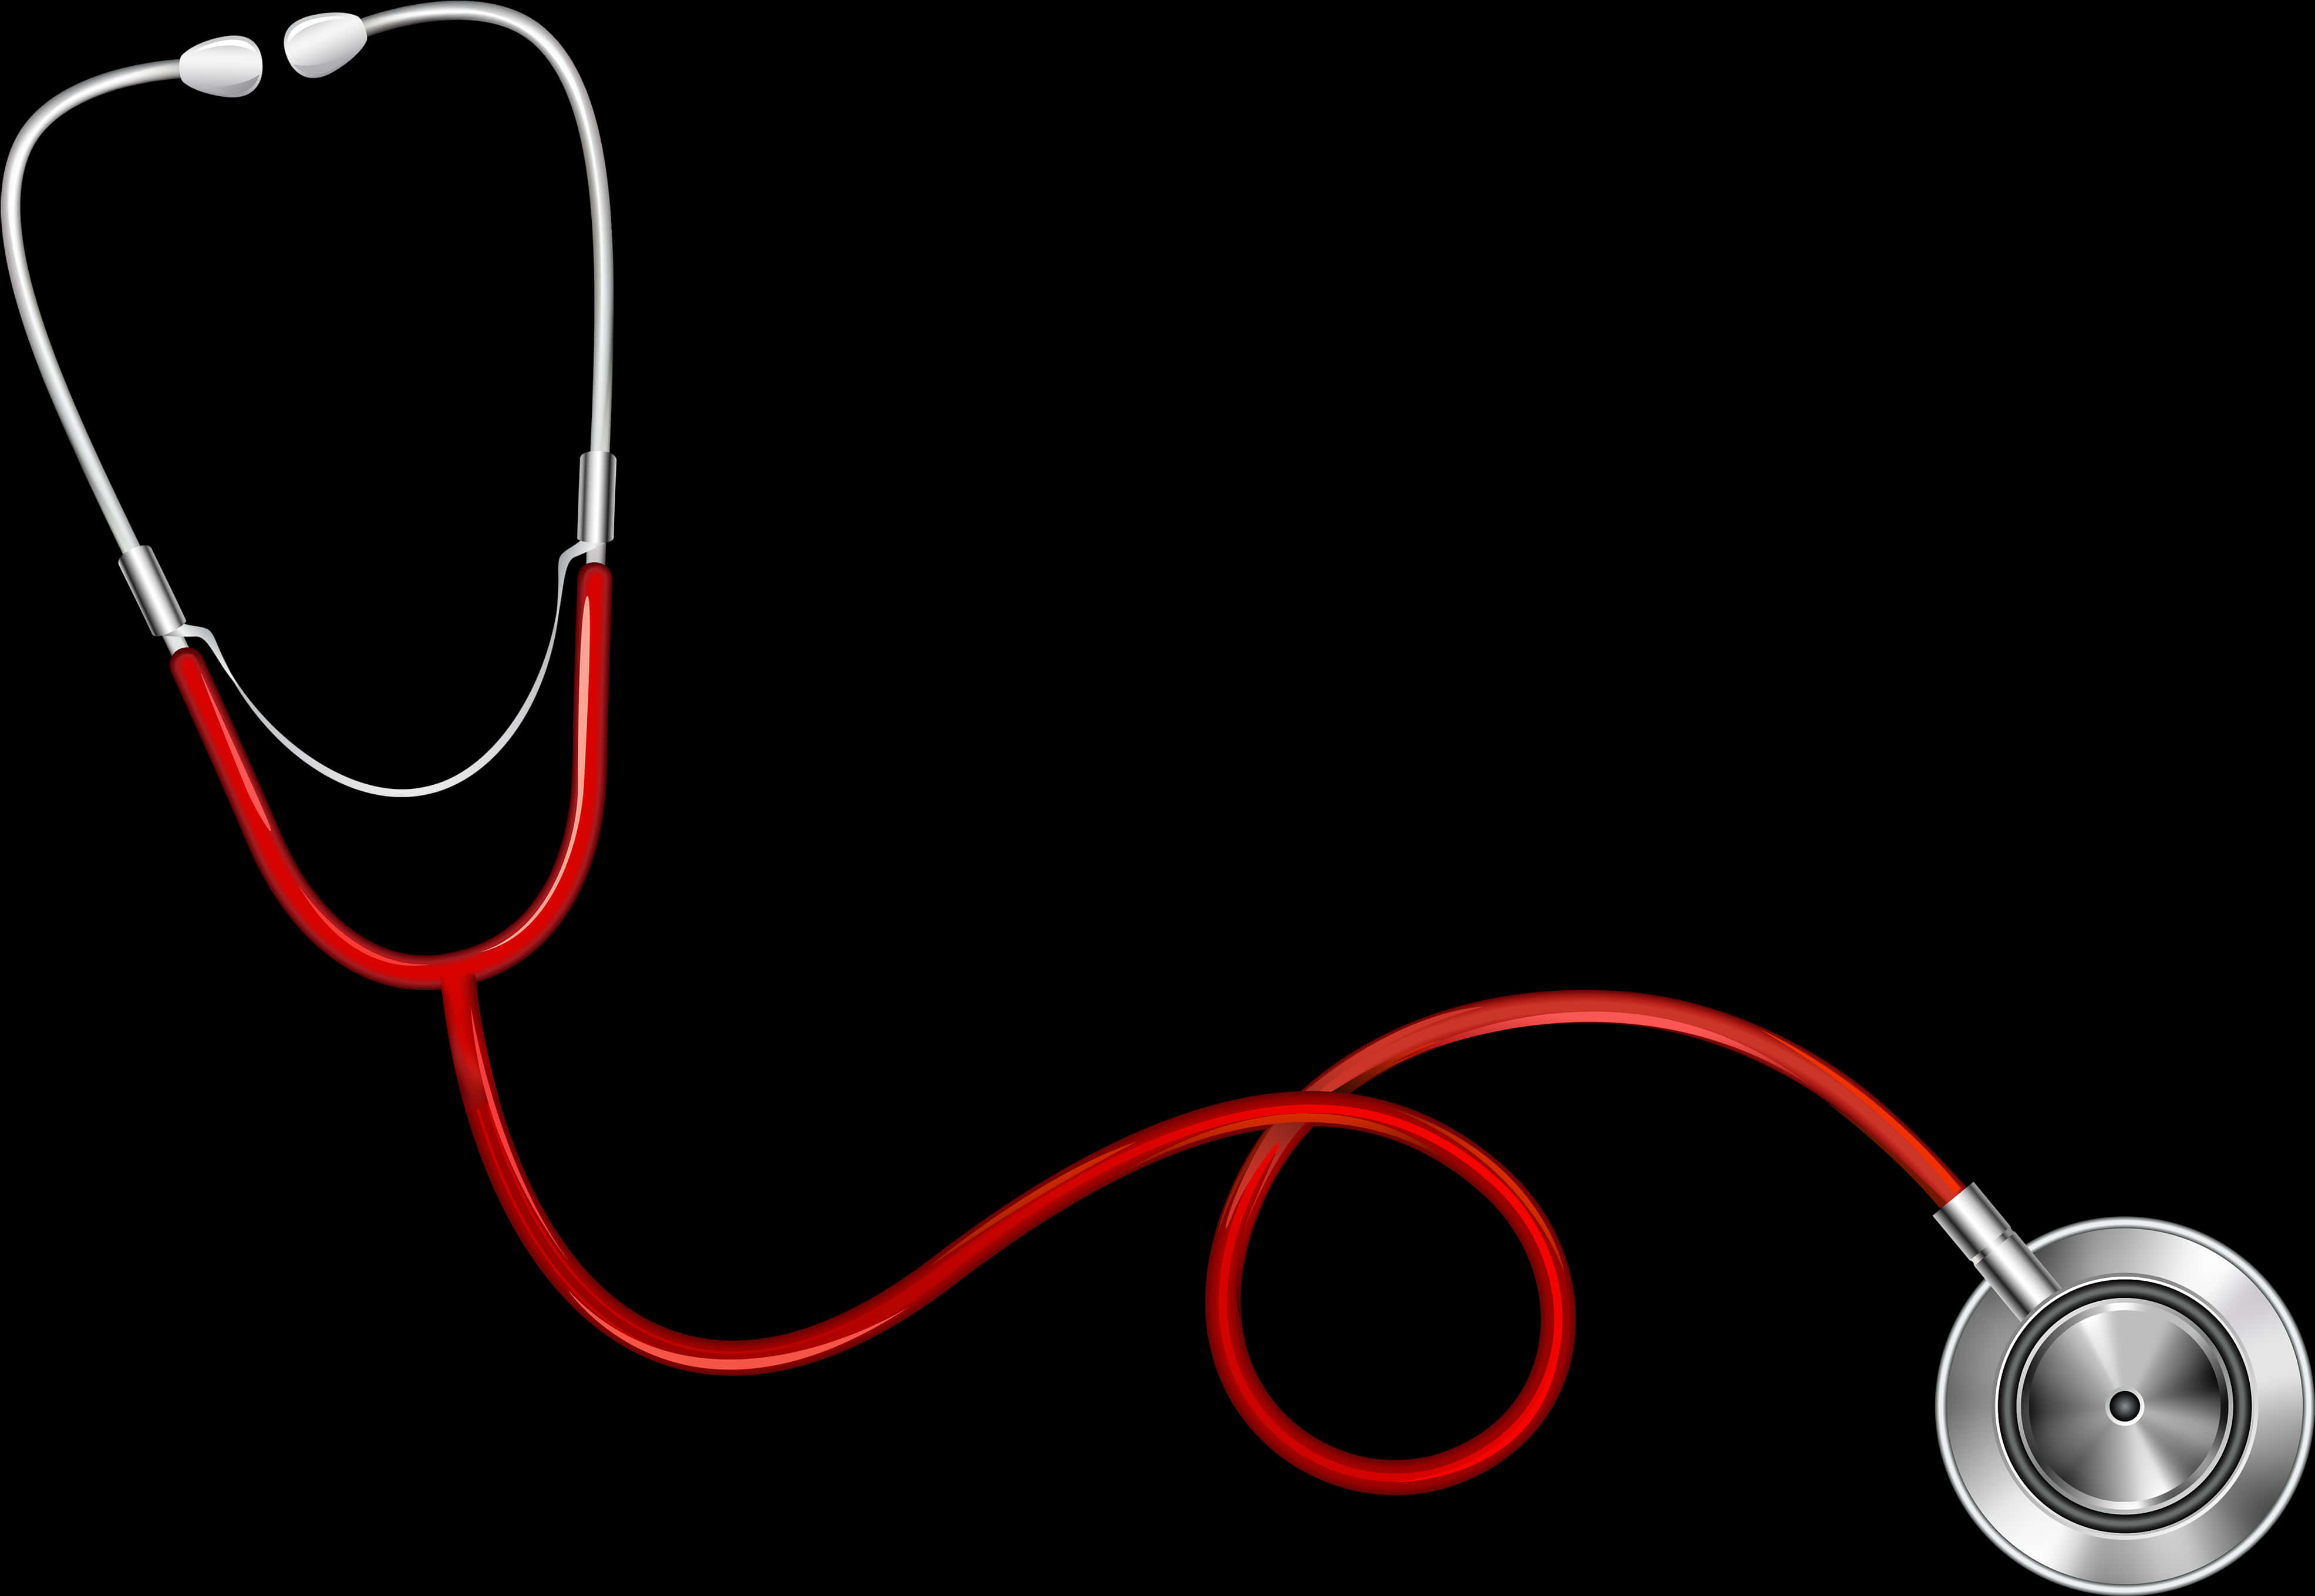 A Stethoscope With A Red Cord